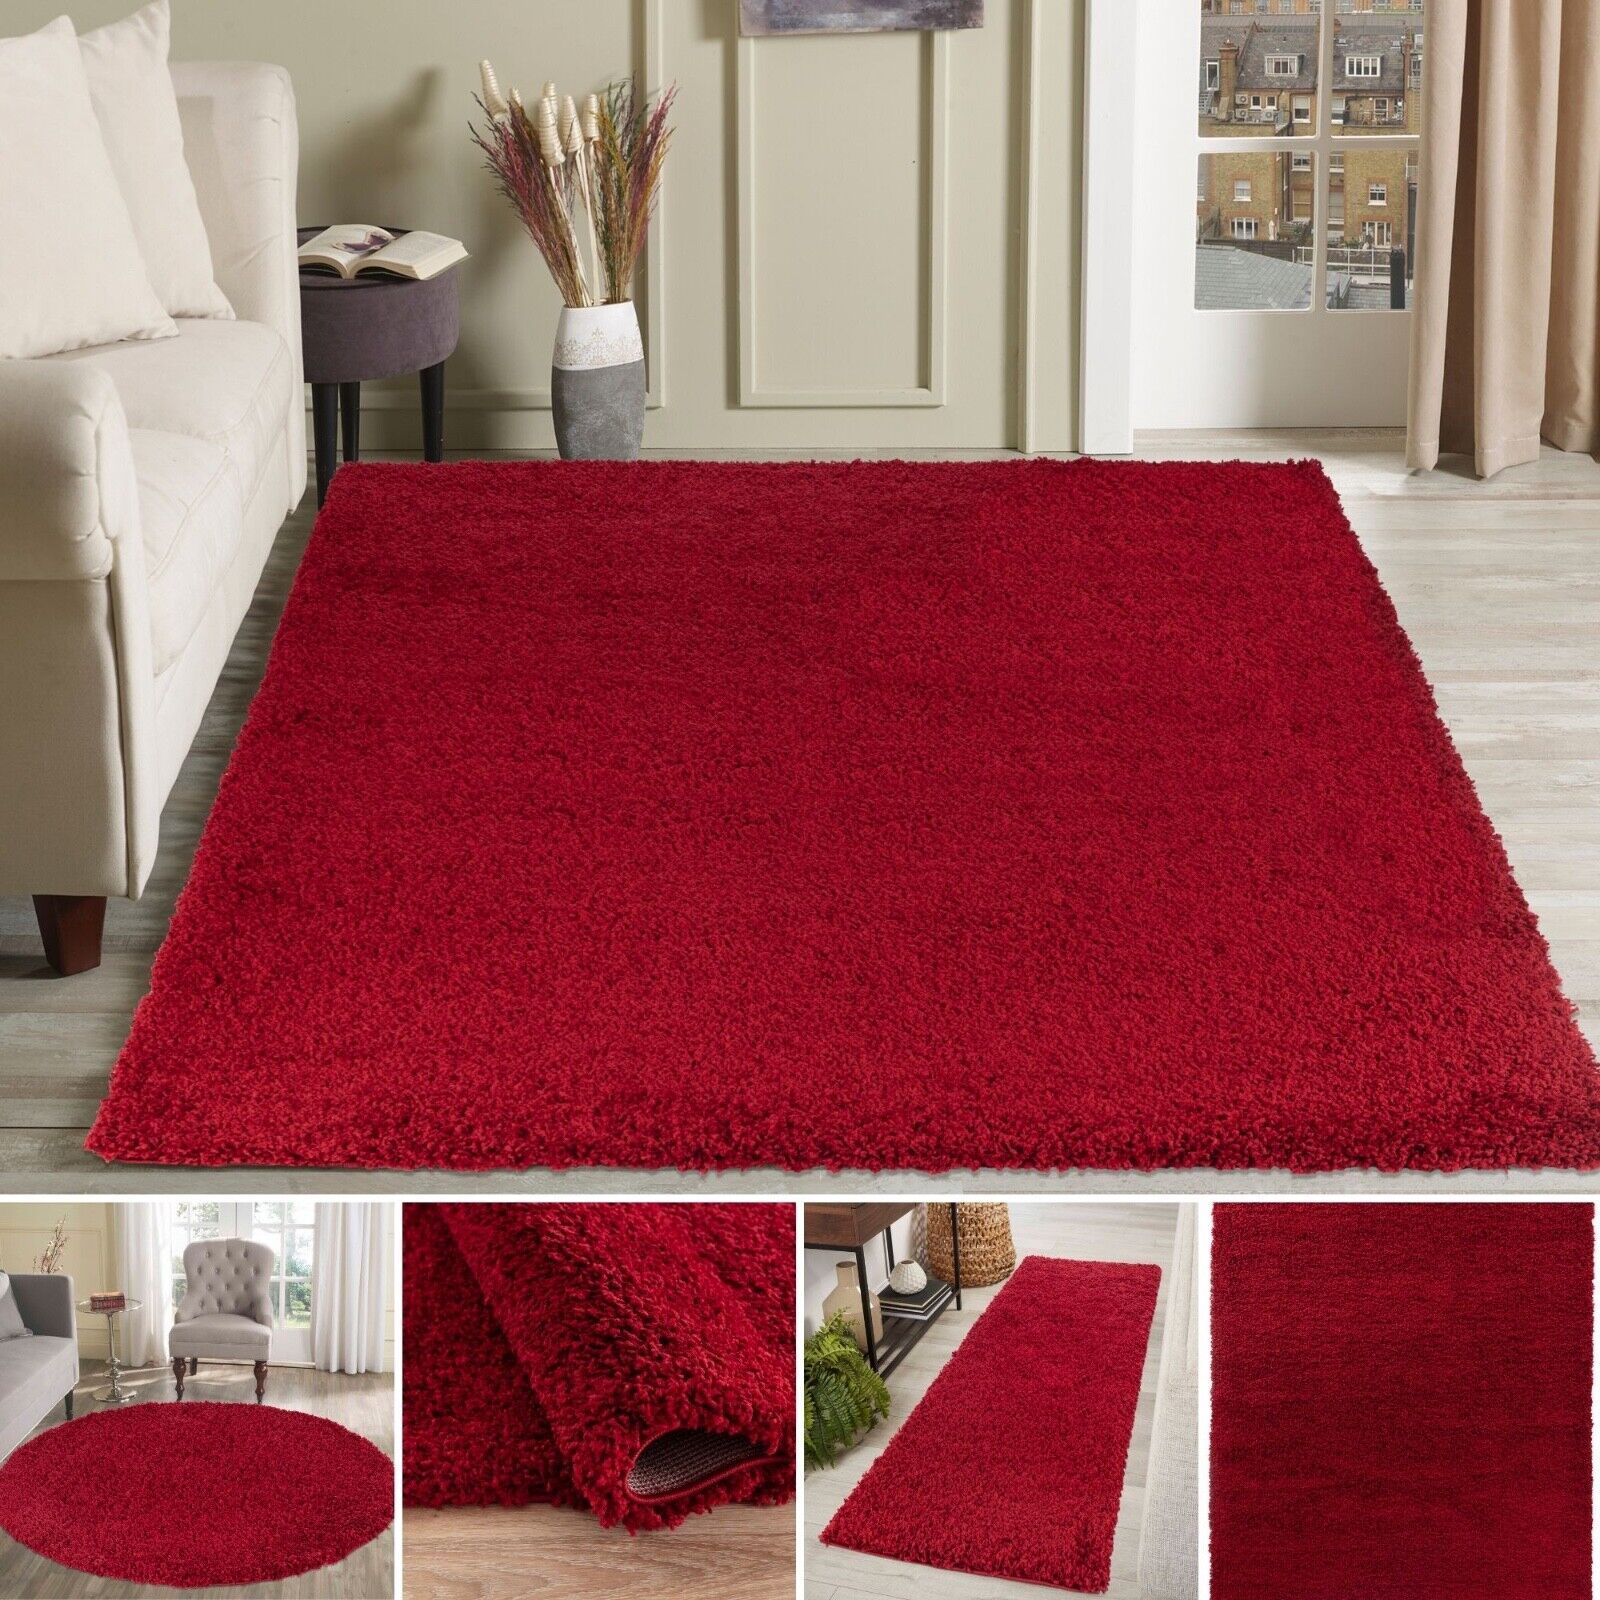 Modern Wine Red Burgundy Small – Large Living Room Area Plain Fluffy Shaggy  Rug | Ebay Within Burgundy Rugs (View 6 of 15)